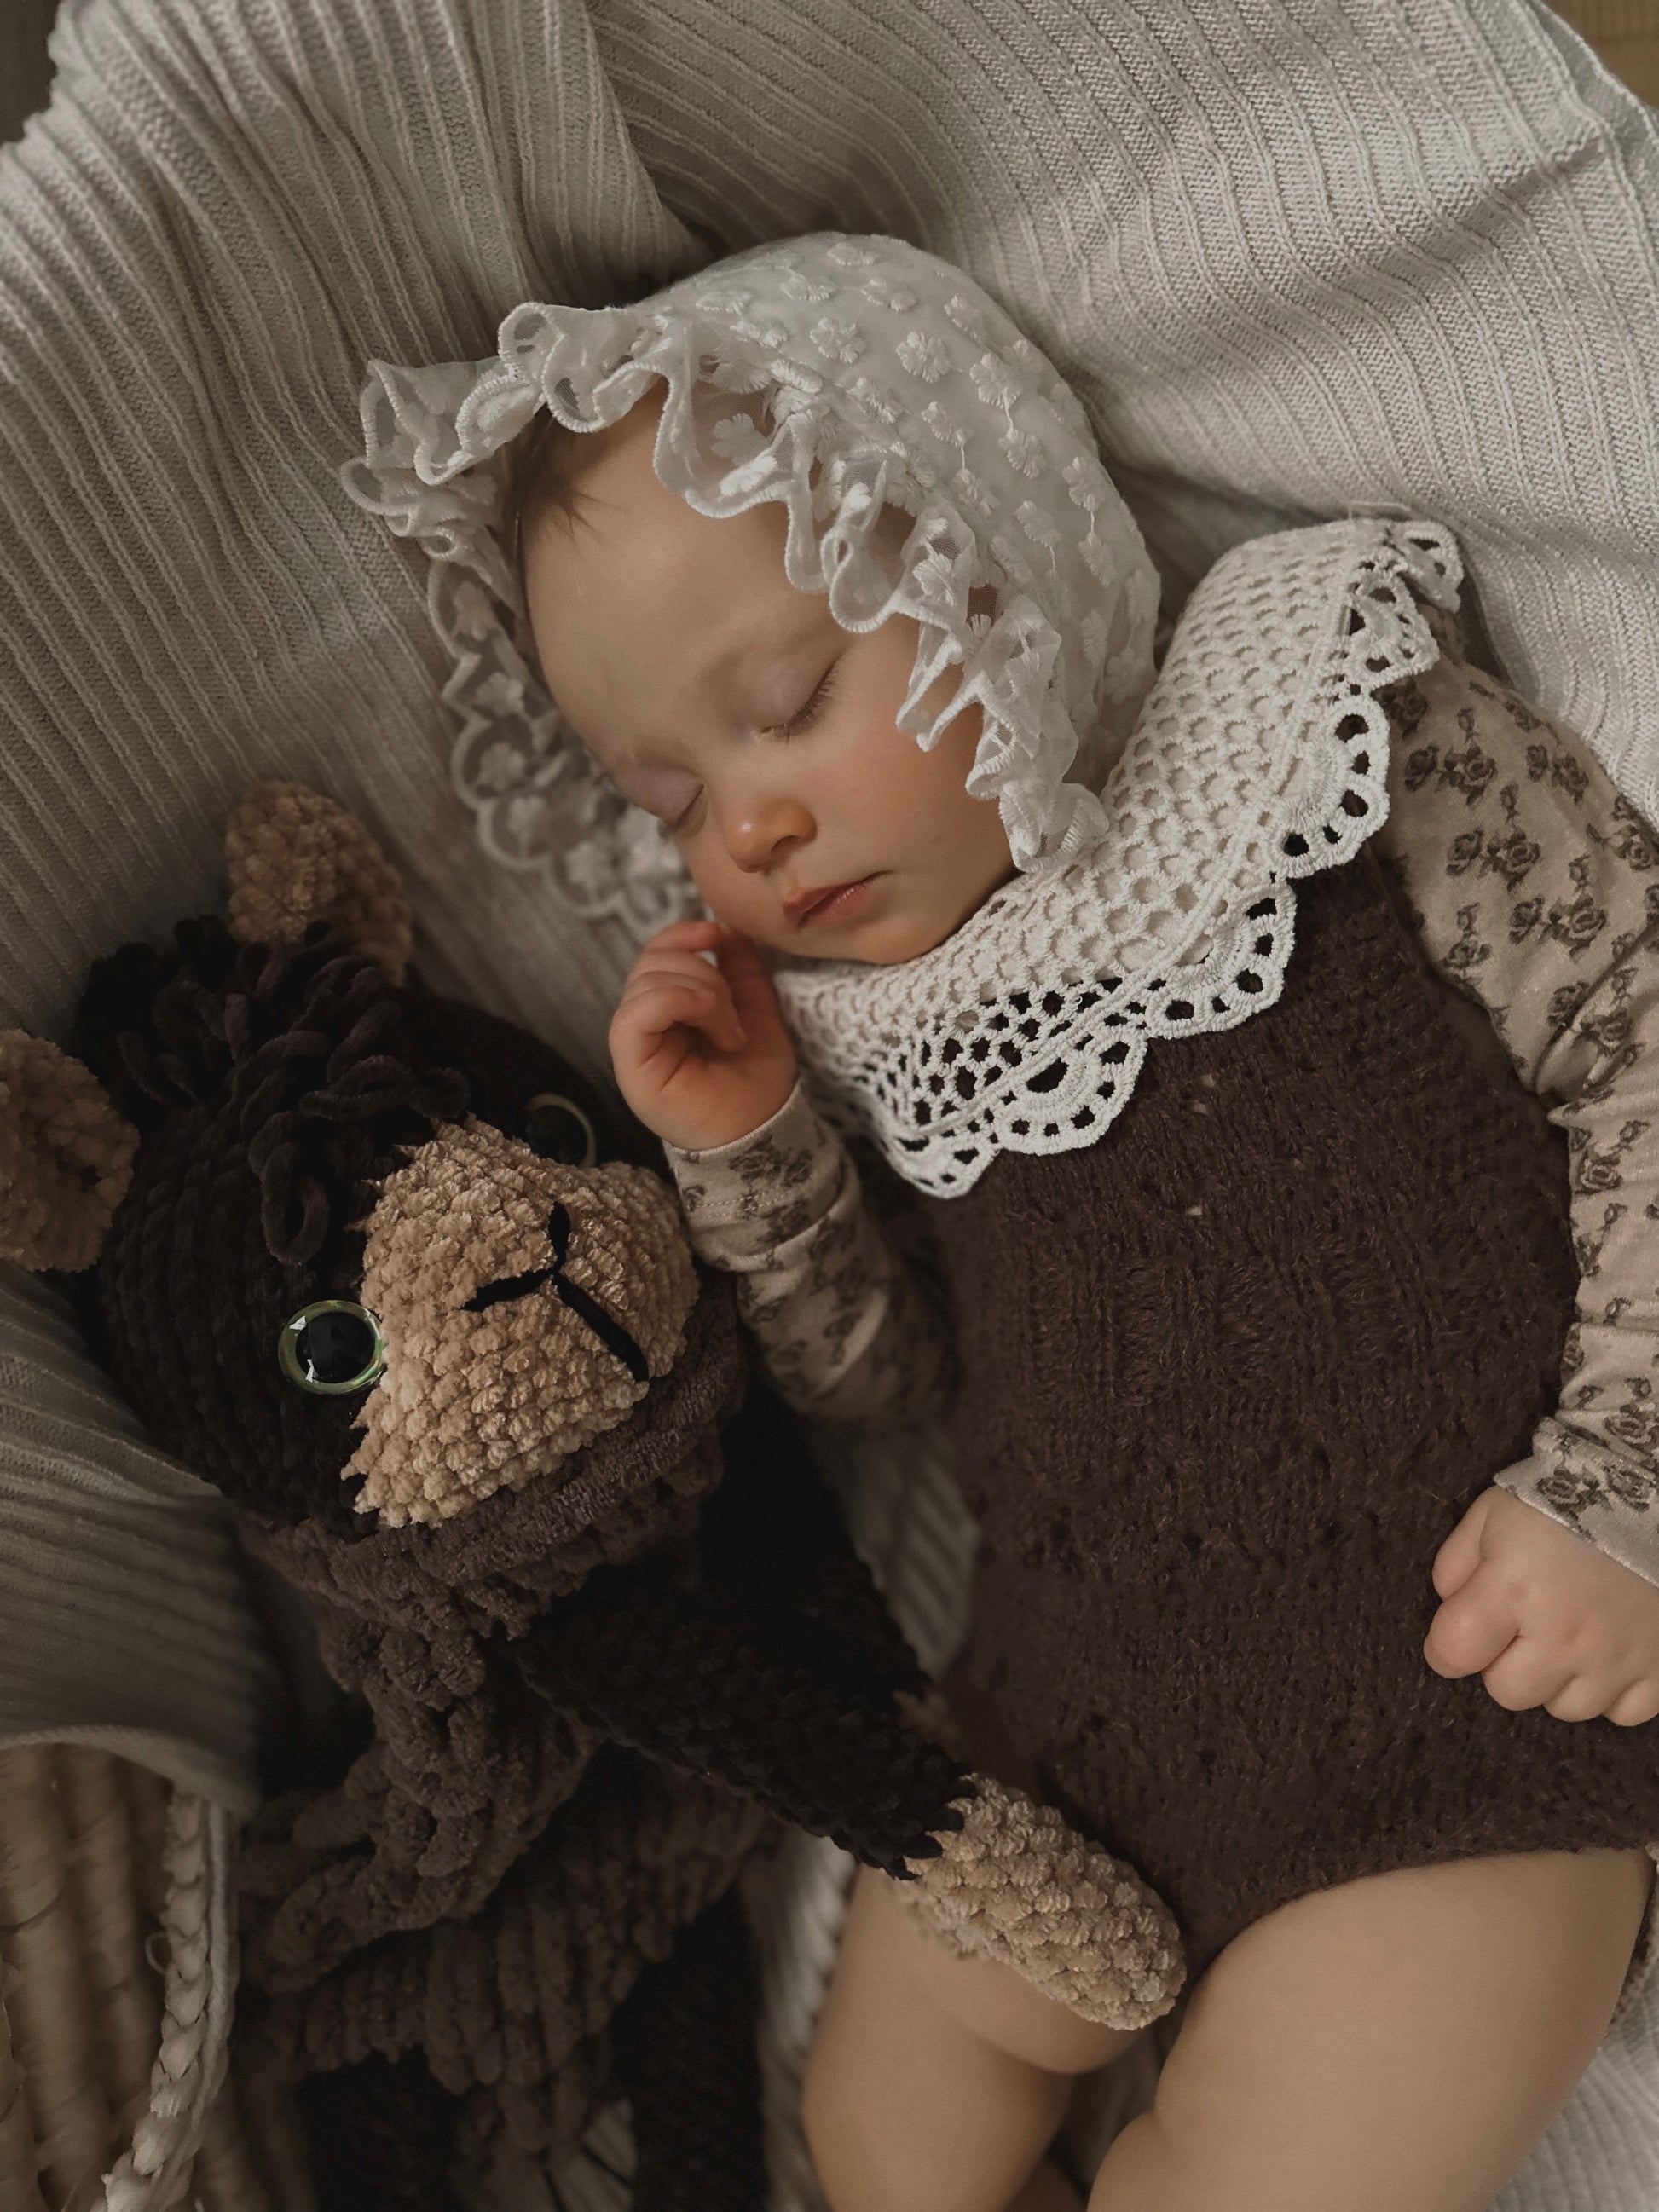  baby laying on a bed next to a stuffed alpaca toy in brown colours.